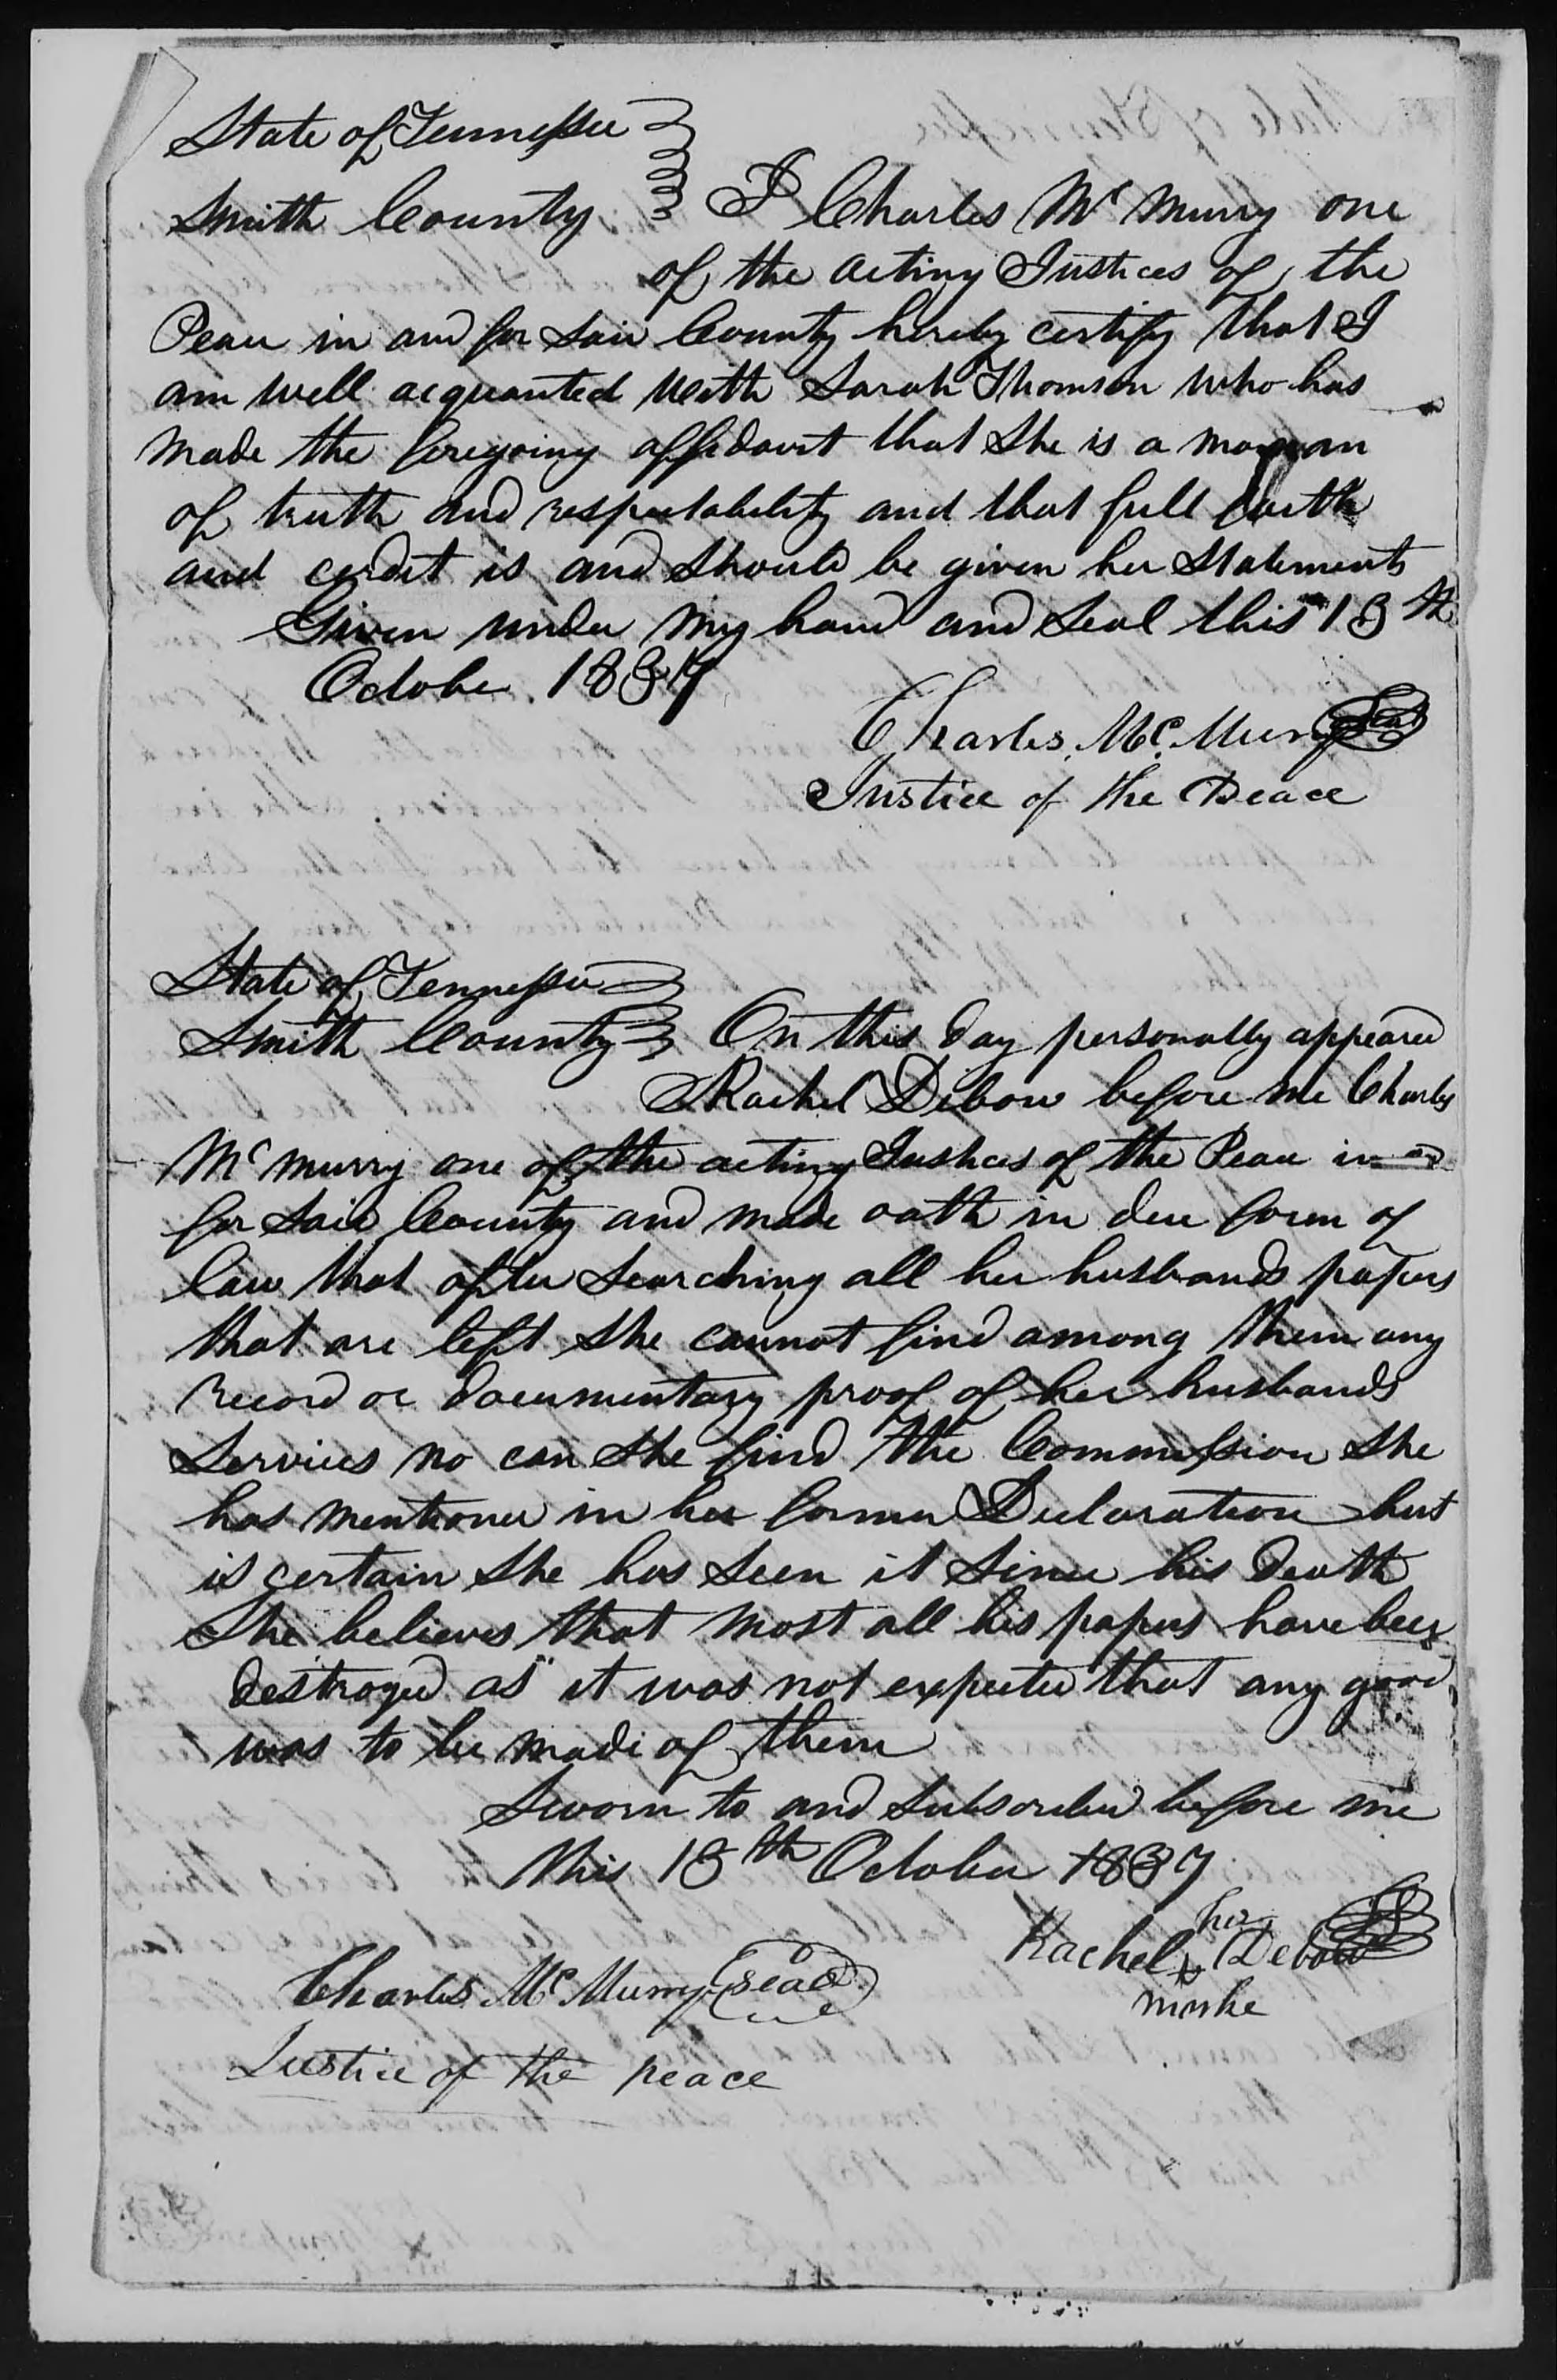 Affidavit of Sarah Thompson in support of a Pension Claim for Rachel Debow, 13 October 1837, page 2